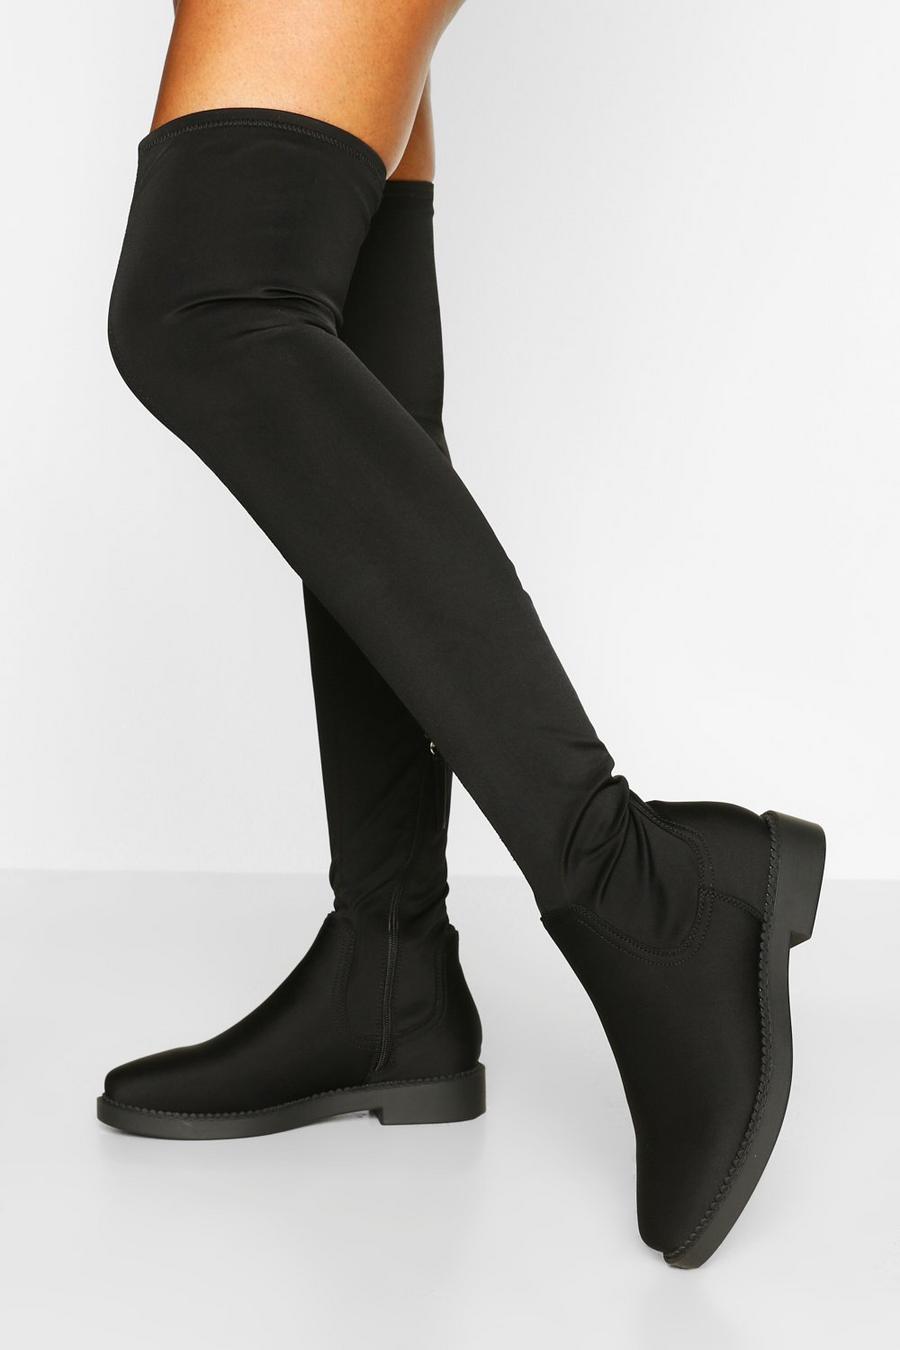 Flat Stretch Over The Knee Boots Boohoo